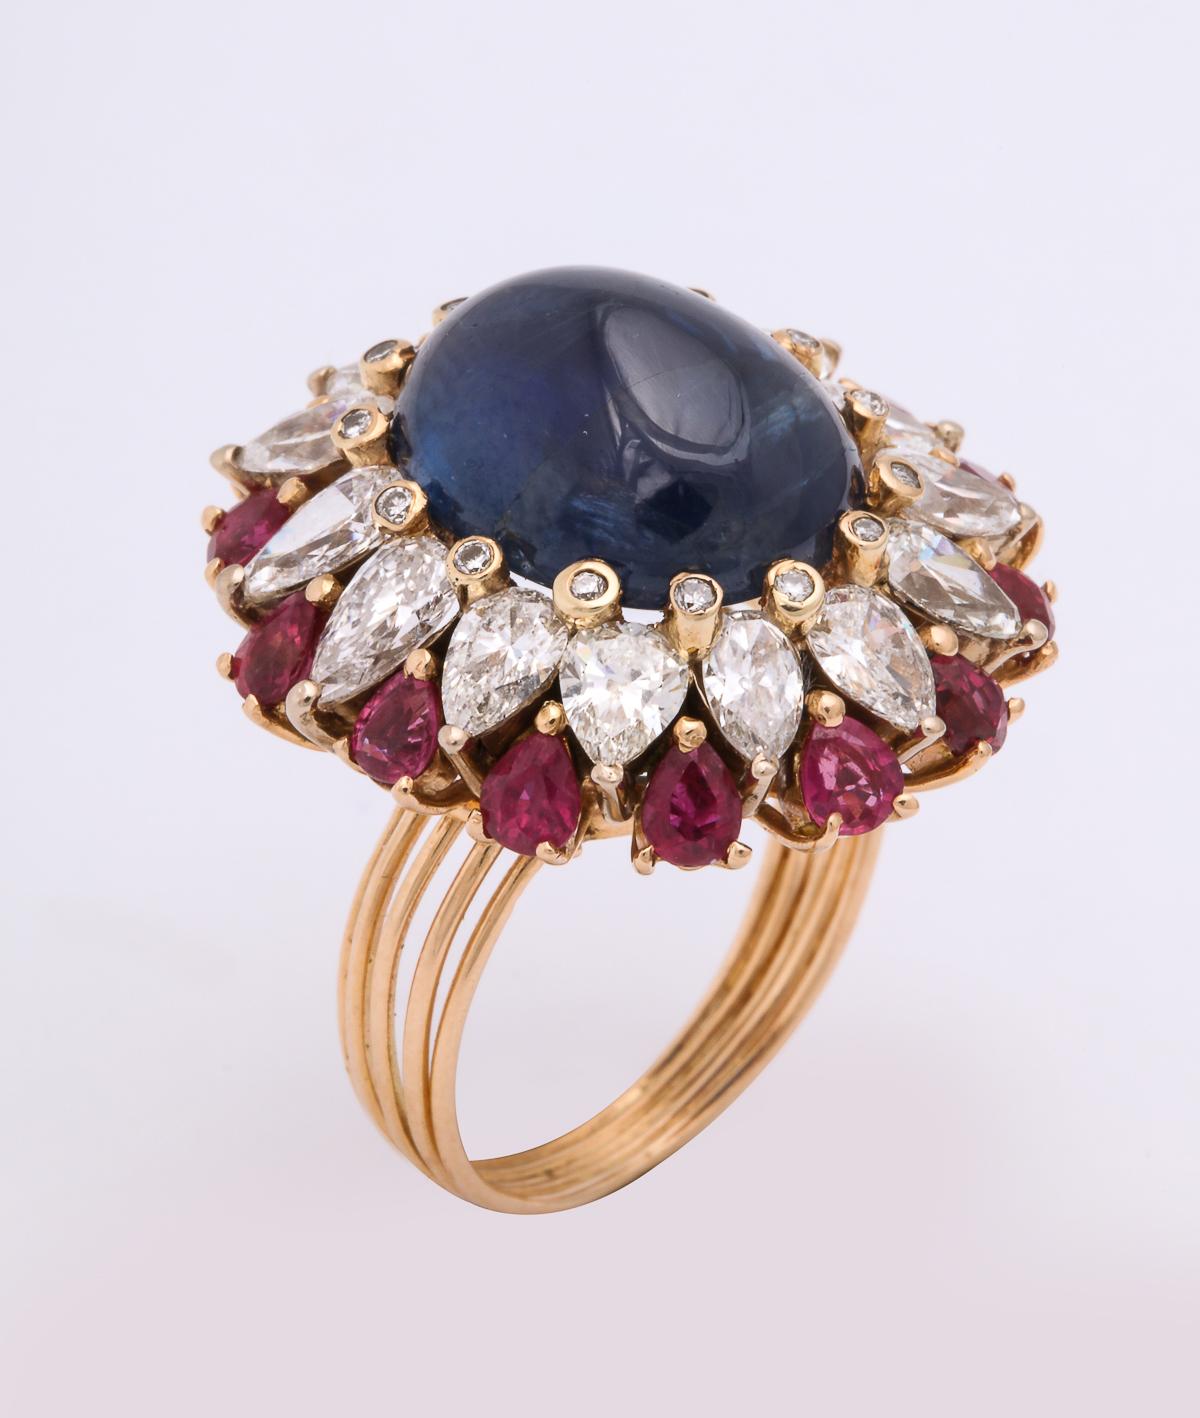 One Ladies 18kt Yellow Gold Cocktail Ring Centering A Deep Blue Cabochon Sapphire Weighing Approximately 14 Carats. Ring Is Surrounded By Fourteen Pear Shaped Diamonds Weighing Approximately Three Carats. This Cocktail Ring Is Further Embellished